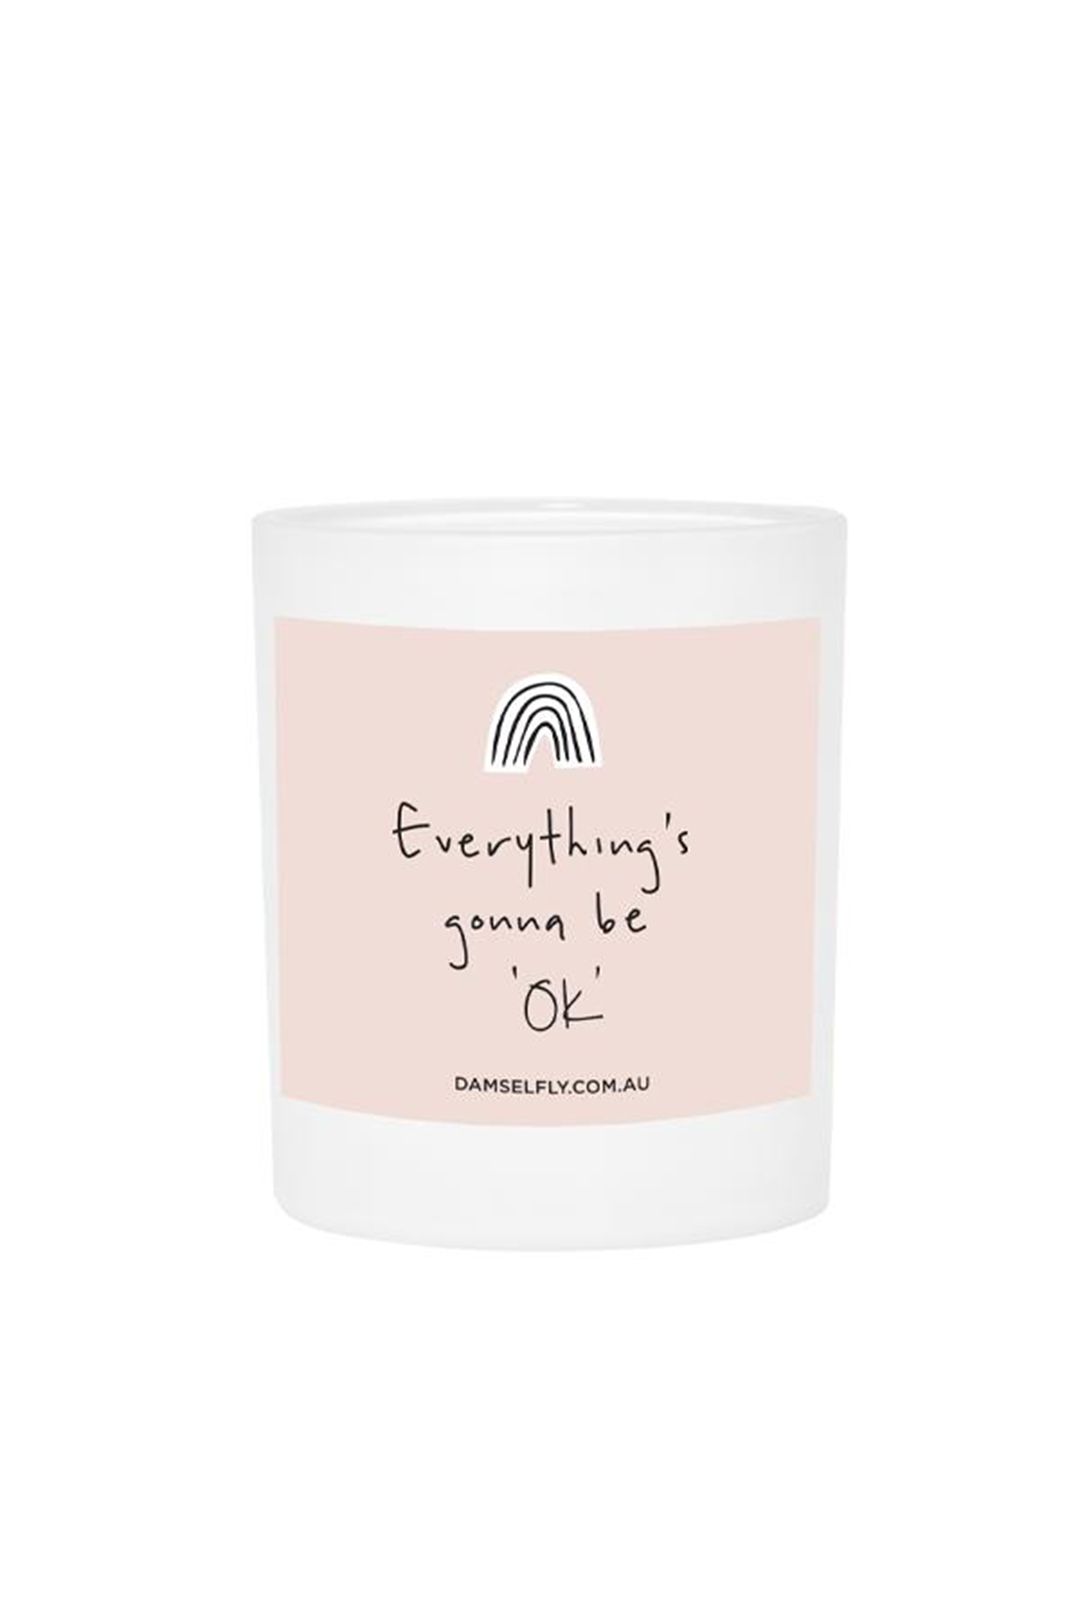 damselfly-collective-everythings-ok-large-candle-front